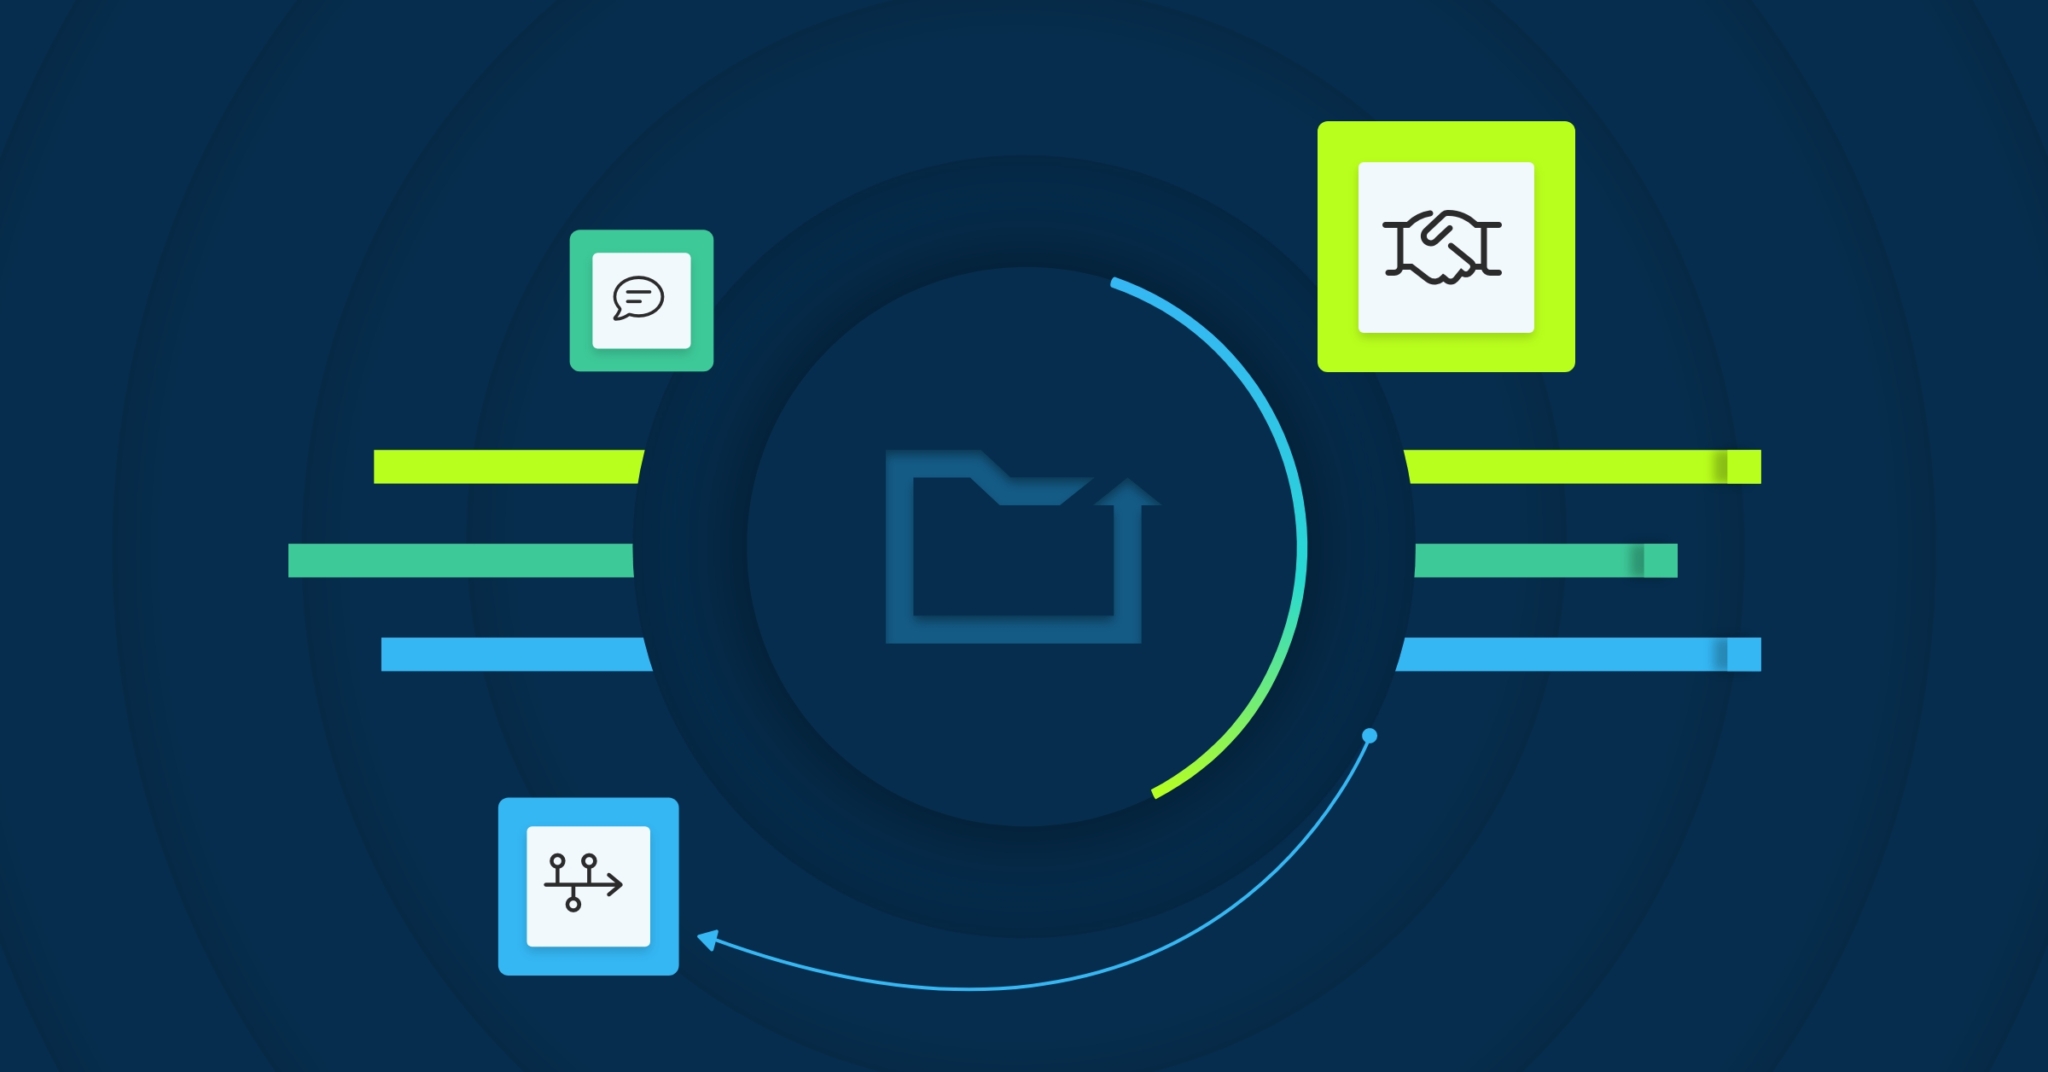 Graphics around a folder to help announce CrashPlan's endpoint backup solutions for MSPs